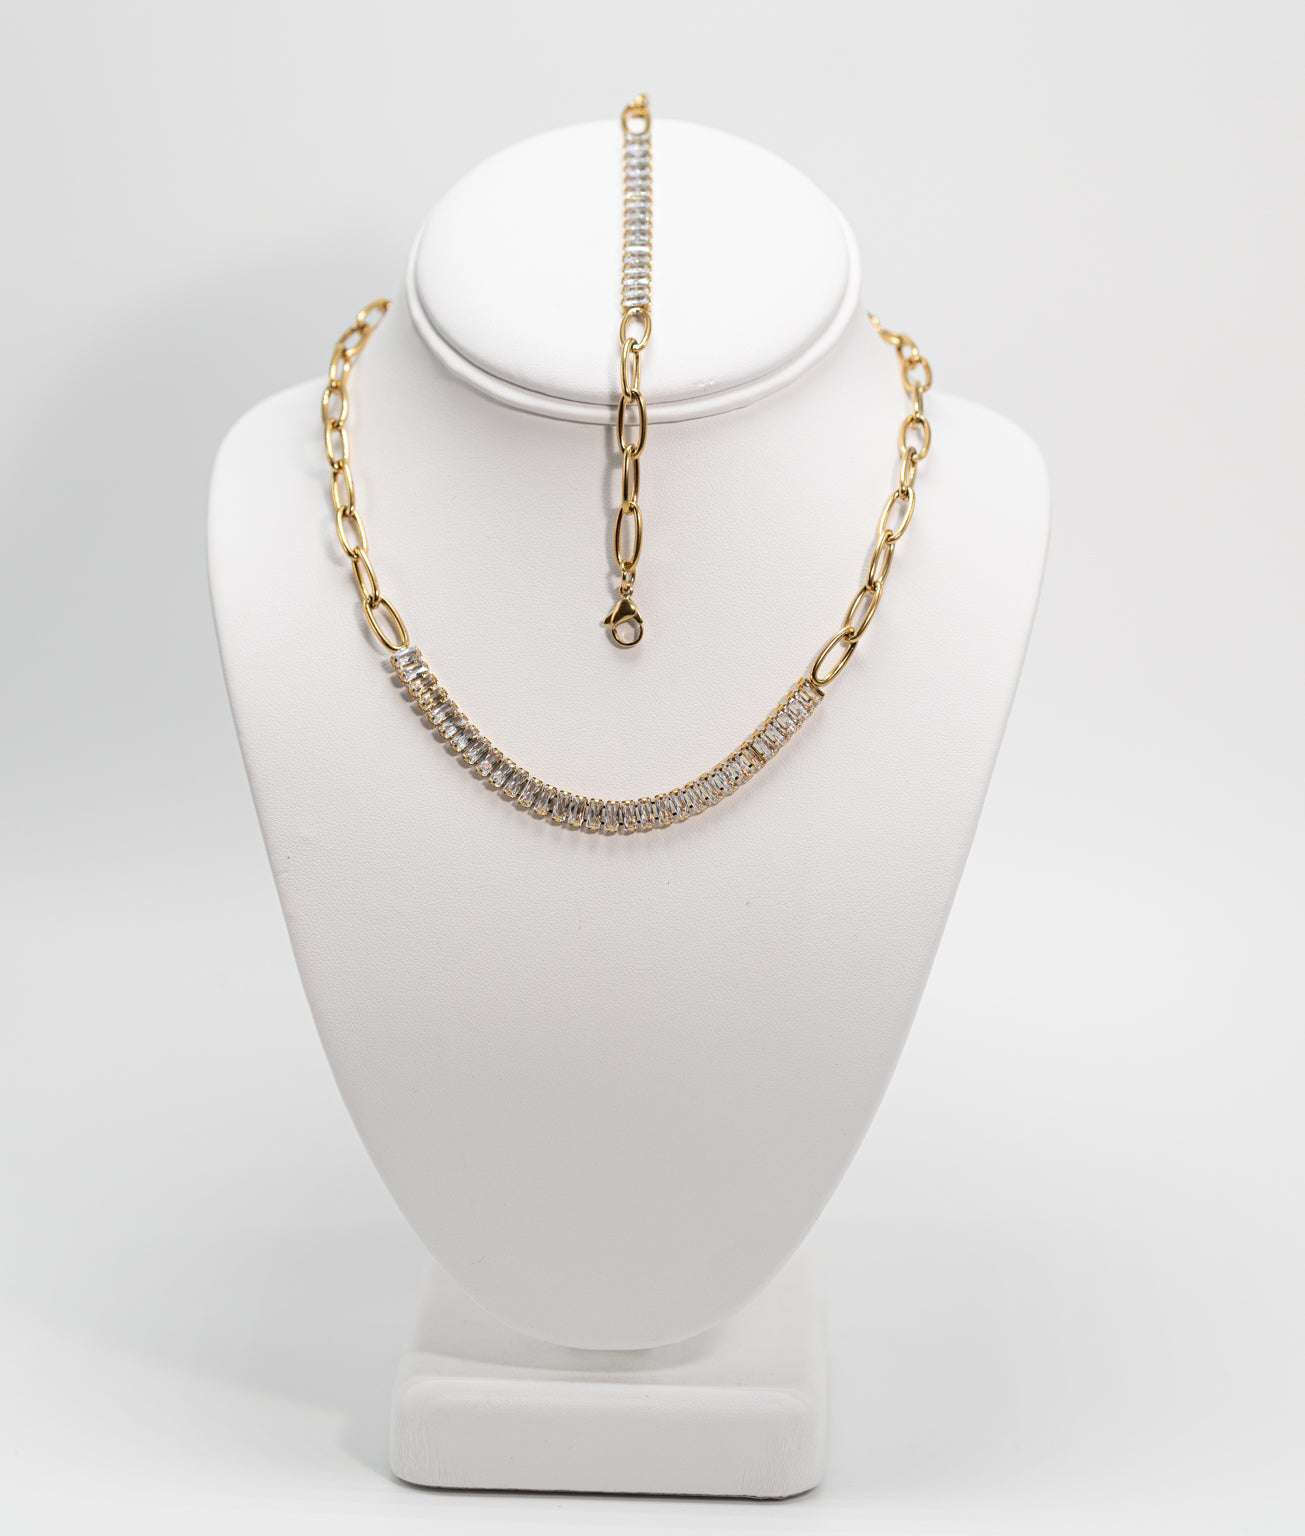 Gold Plated Tennis Chain Necklace and Bracelet Set